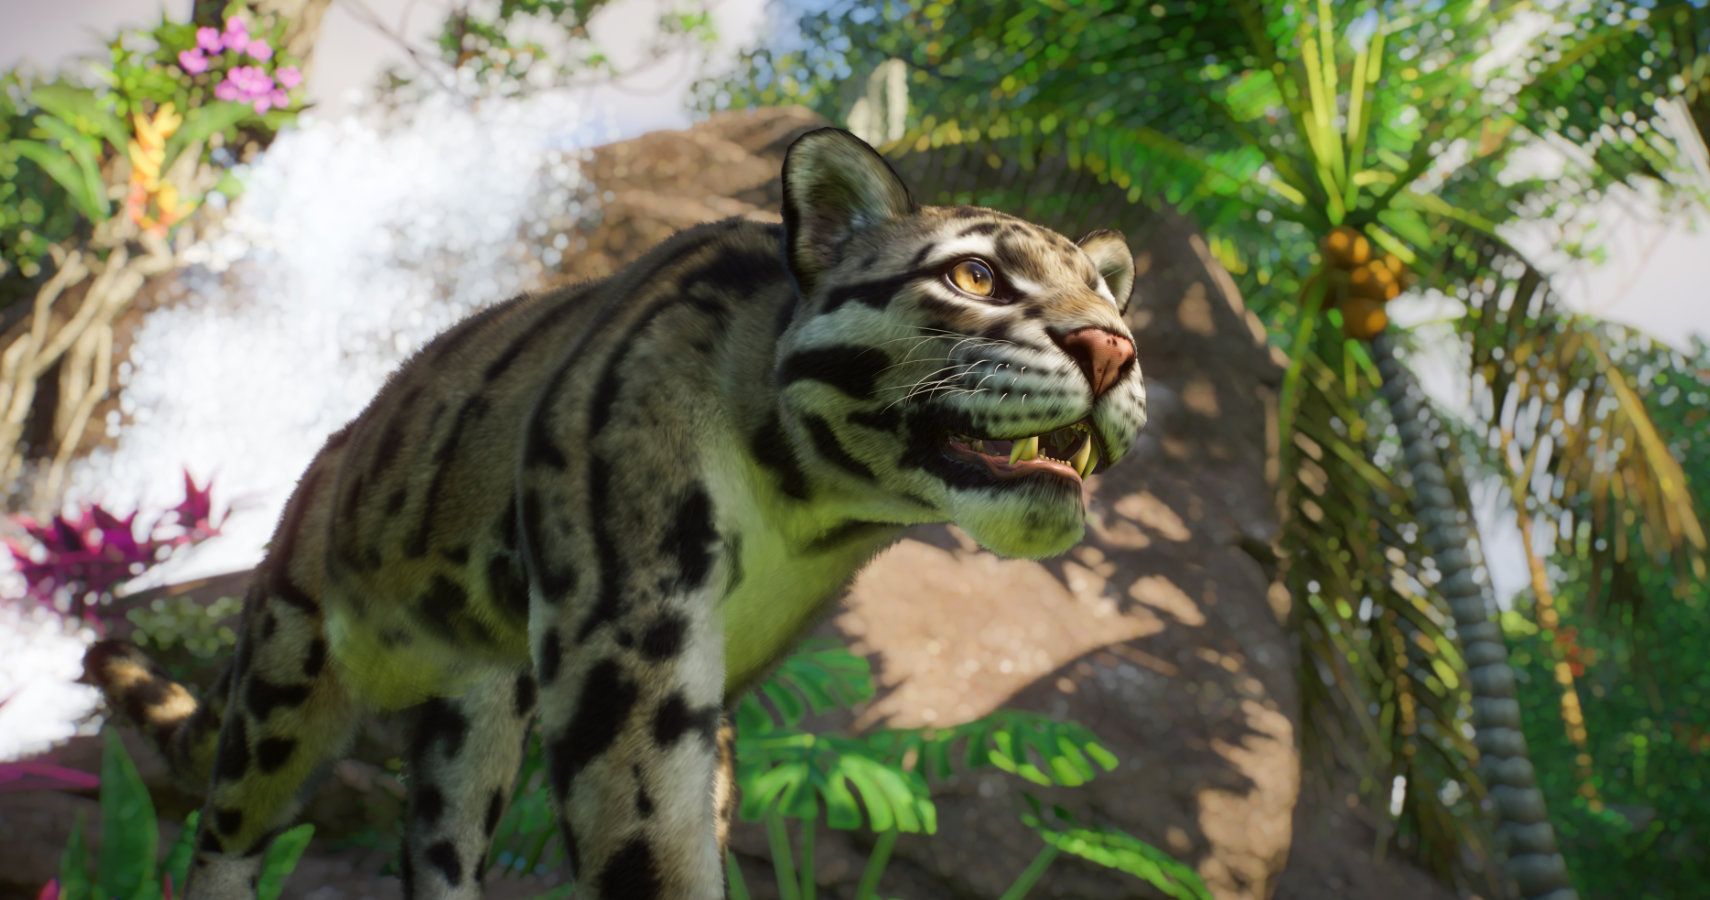 A clouded leopard from the upcoming southeast asia dlc pack for planet zoo.